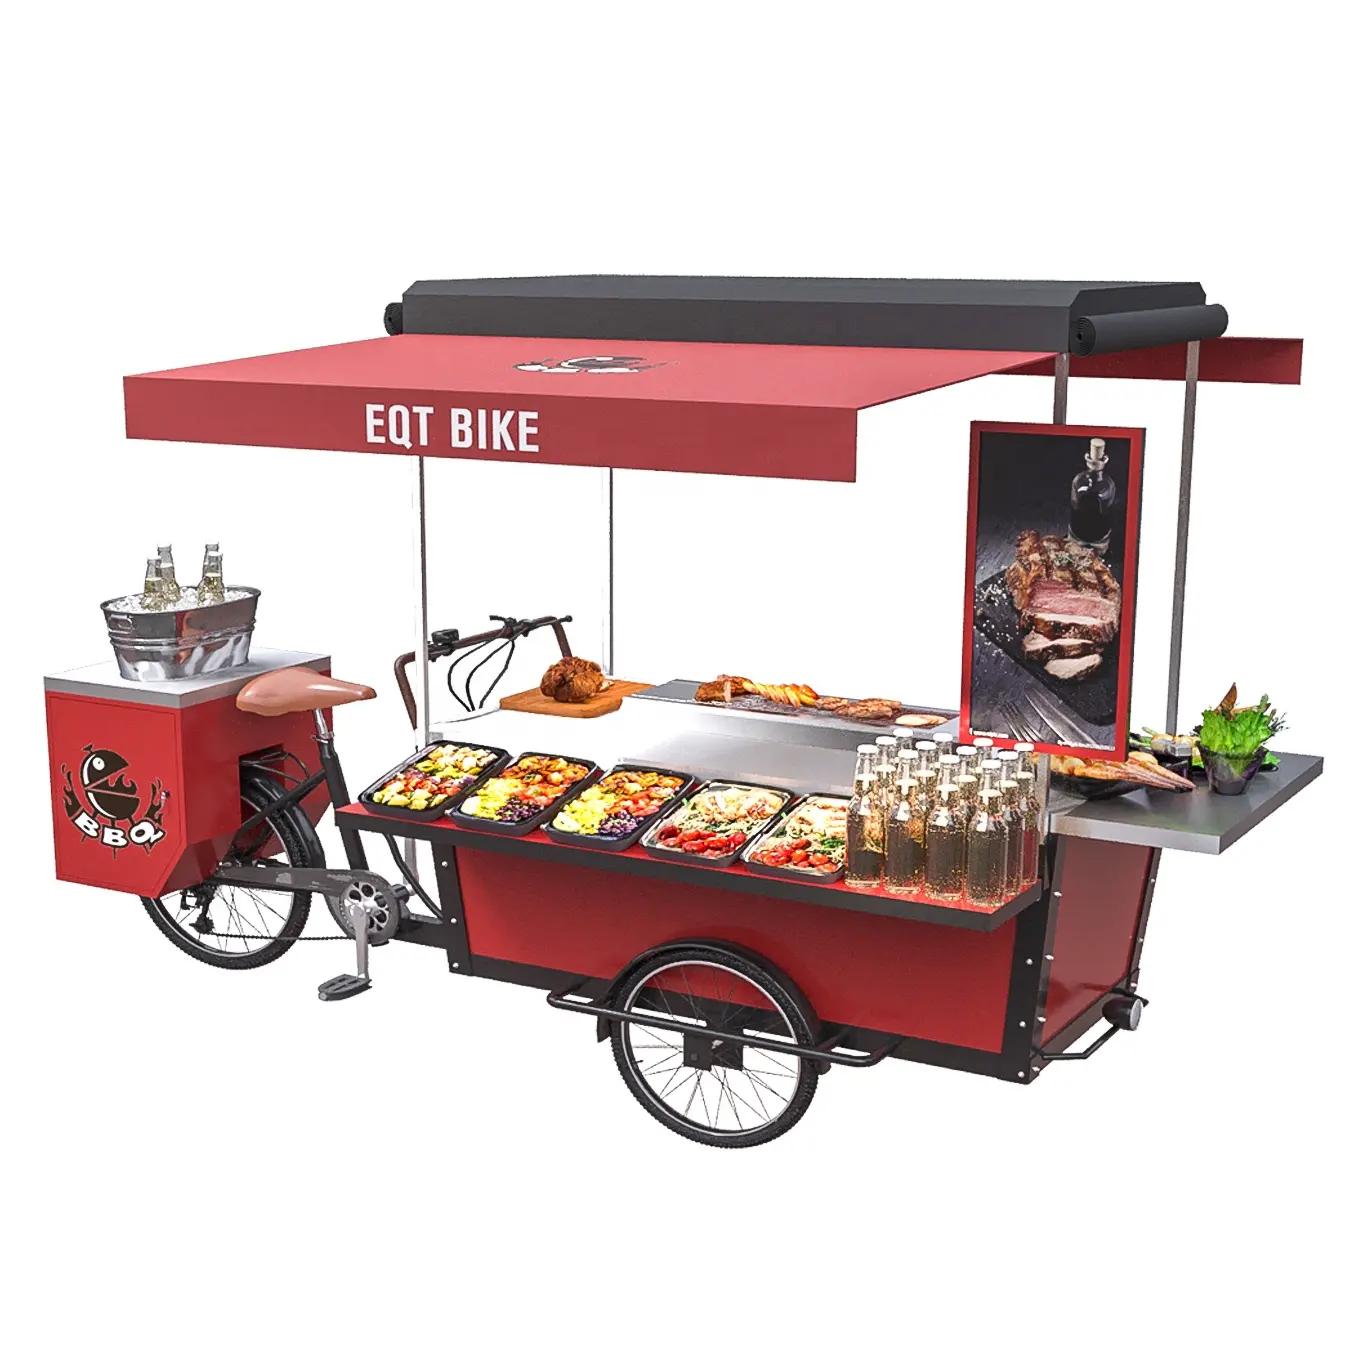 EQT 2020 Grill Barbecue Bike Gas Support Food Cart Mobile BBQ Bike for for Christmas Outdoor Picnic